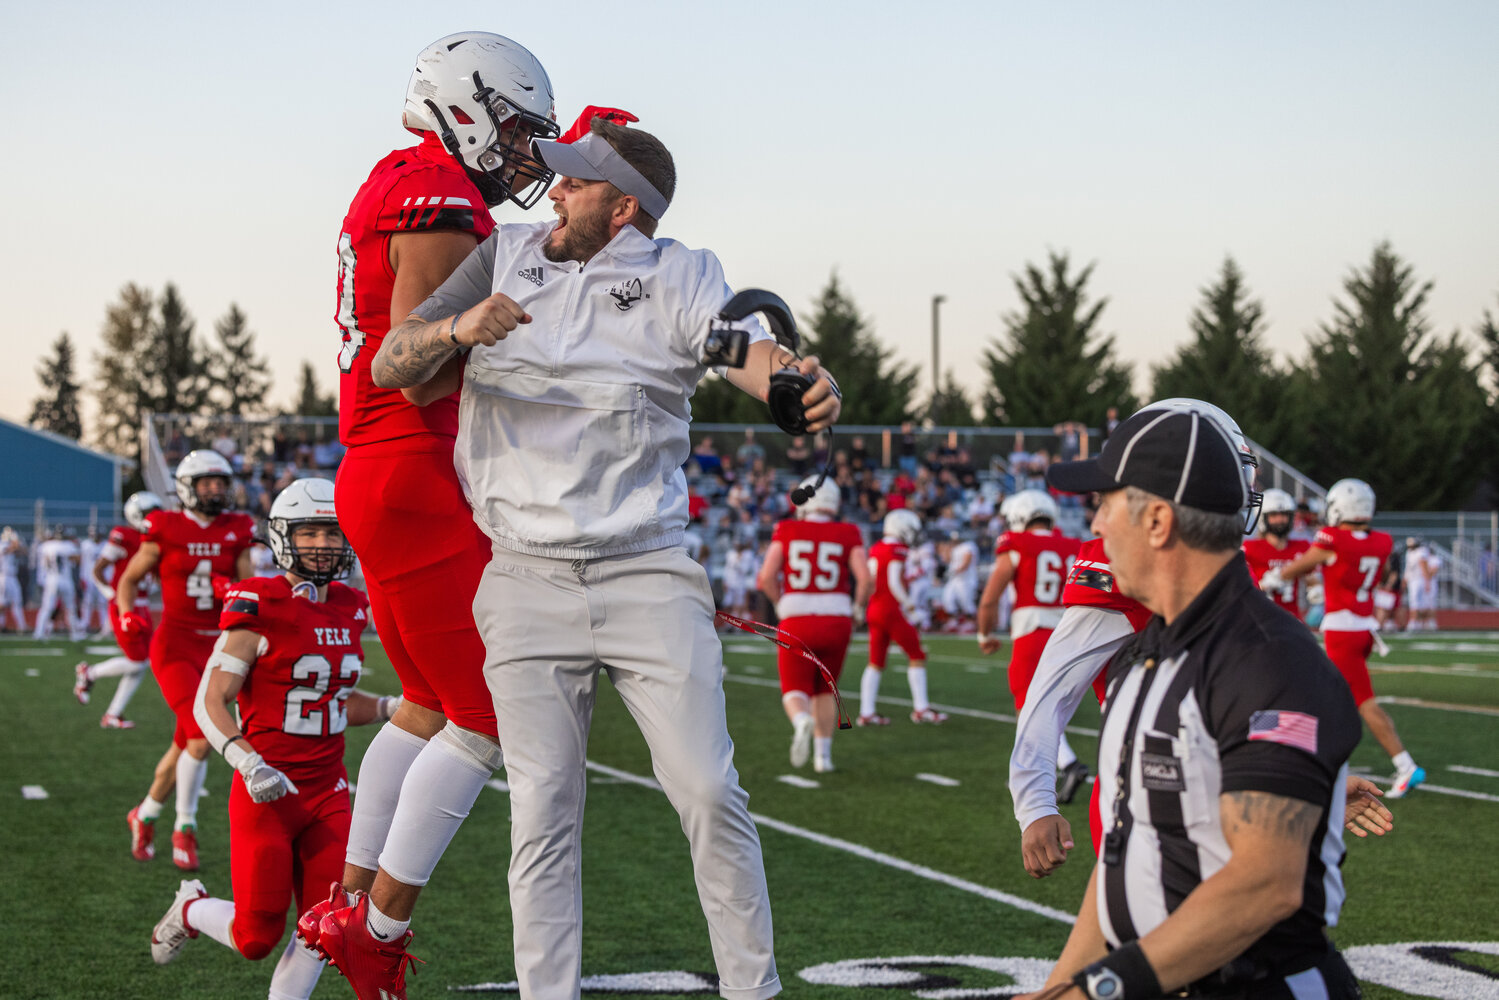 A Yelm player celebrates with a Tornado football coach at their Sept. 8 game against Union. The Tornados will take on Central Kitsap, Friday, Sept. 15.